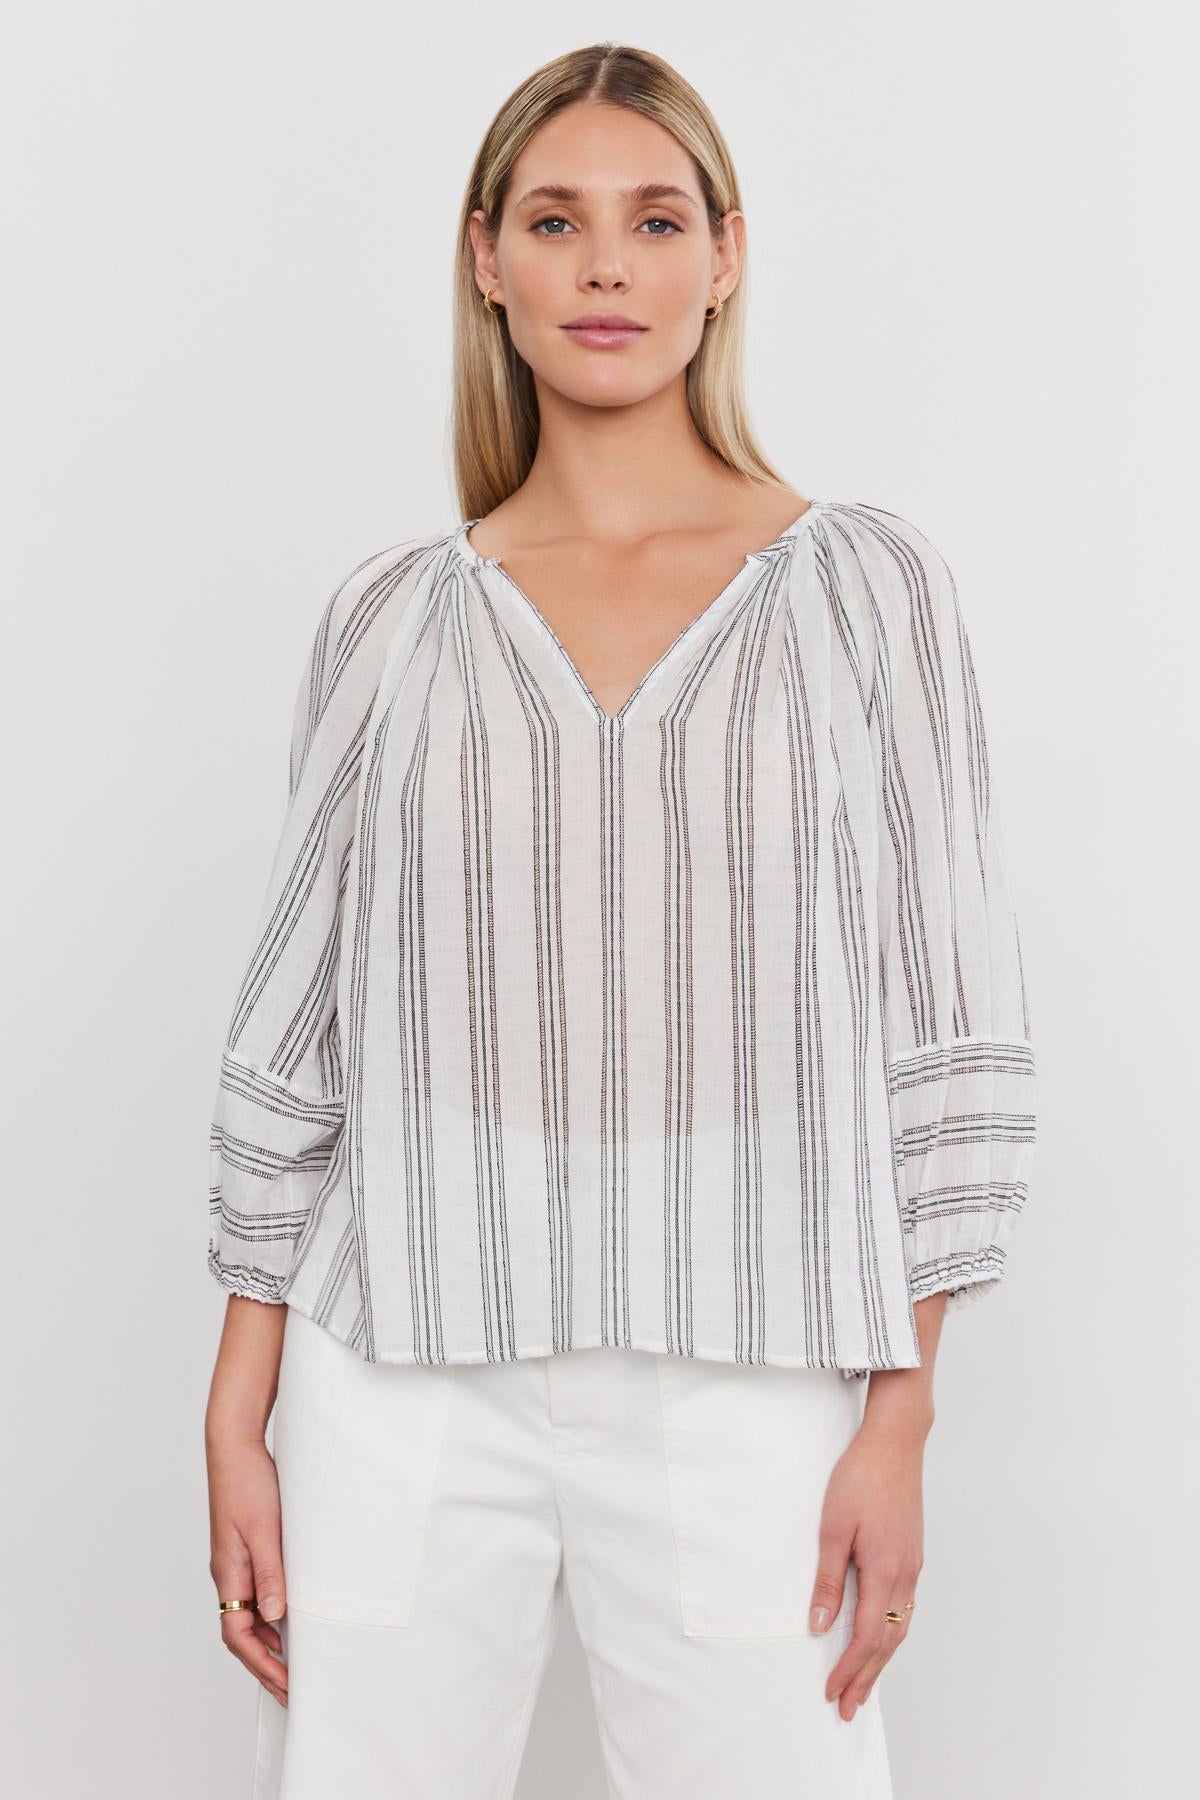 Woman wearing a Velvet by Graham & Spencer Gianna top, a striped v-neckline blouse with three-quarter sleeves, paired with white pants, standing against a white background.-36910245806273